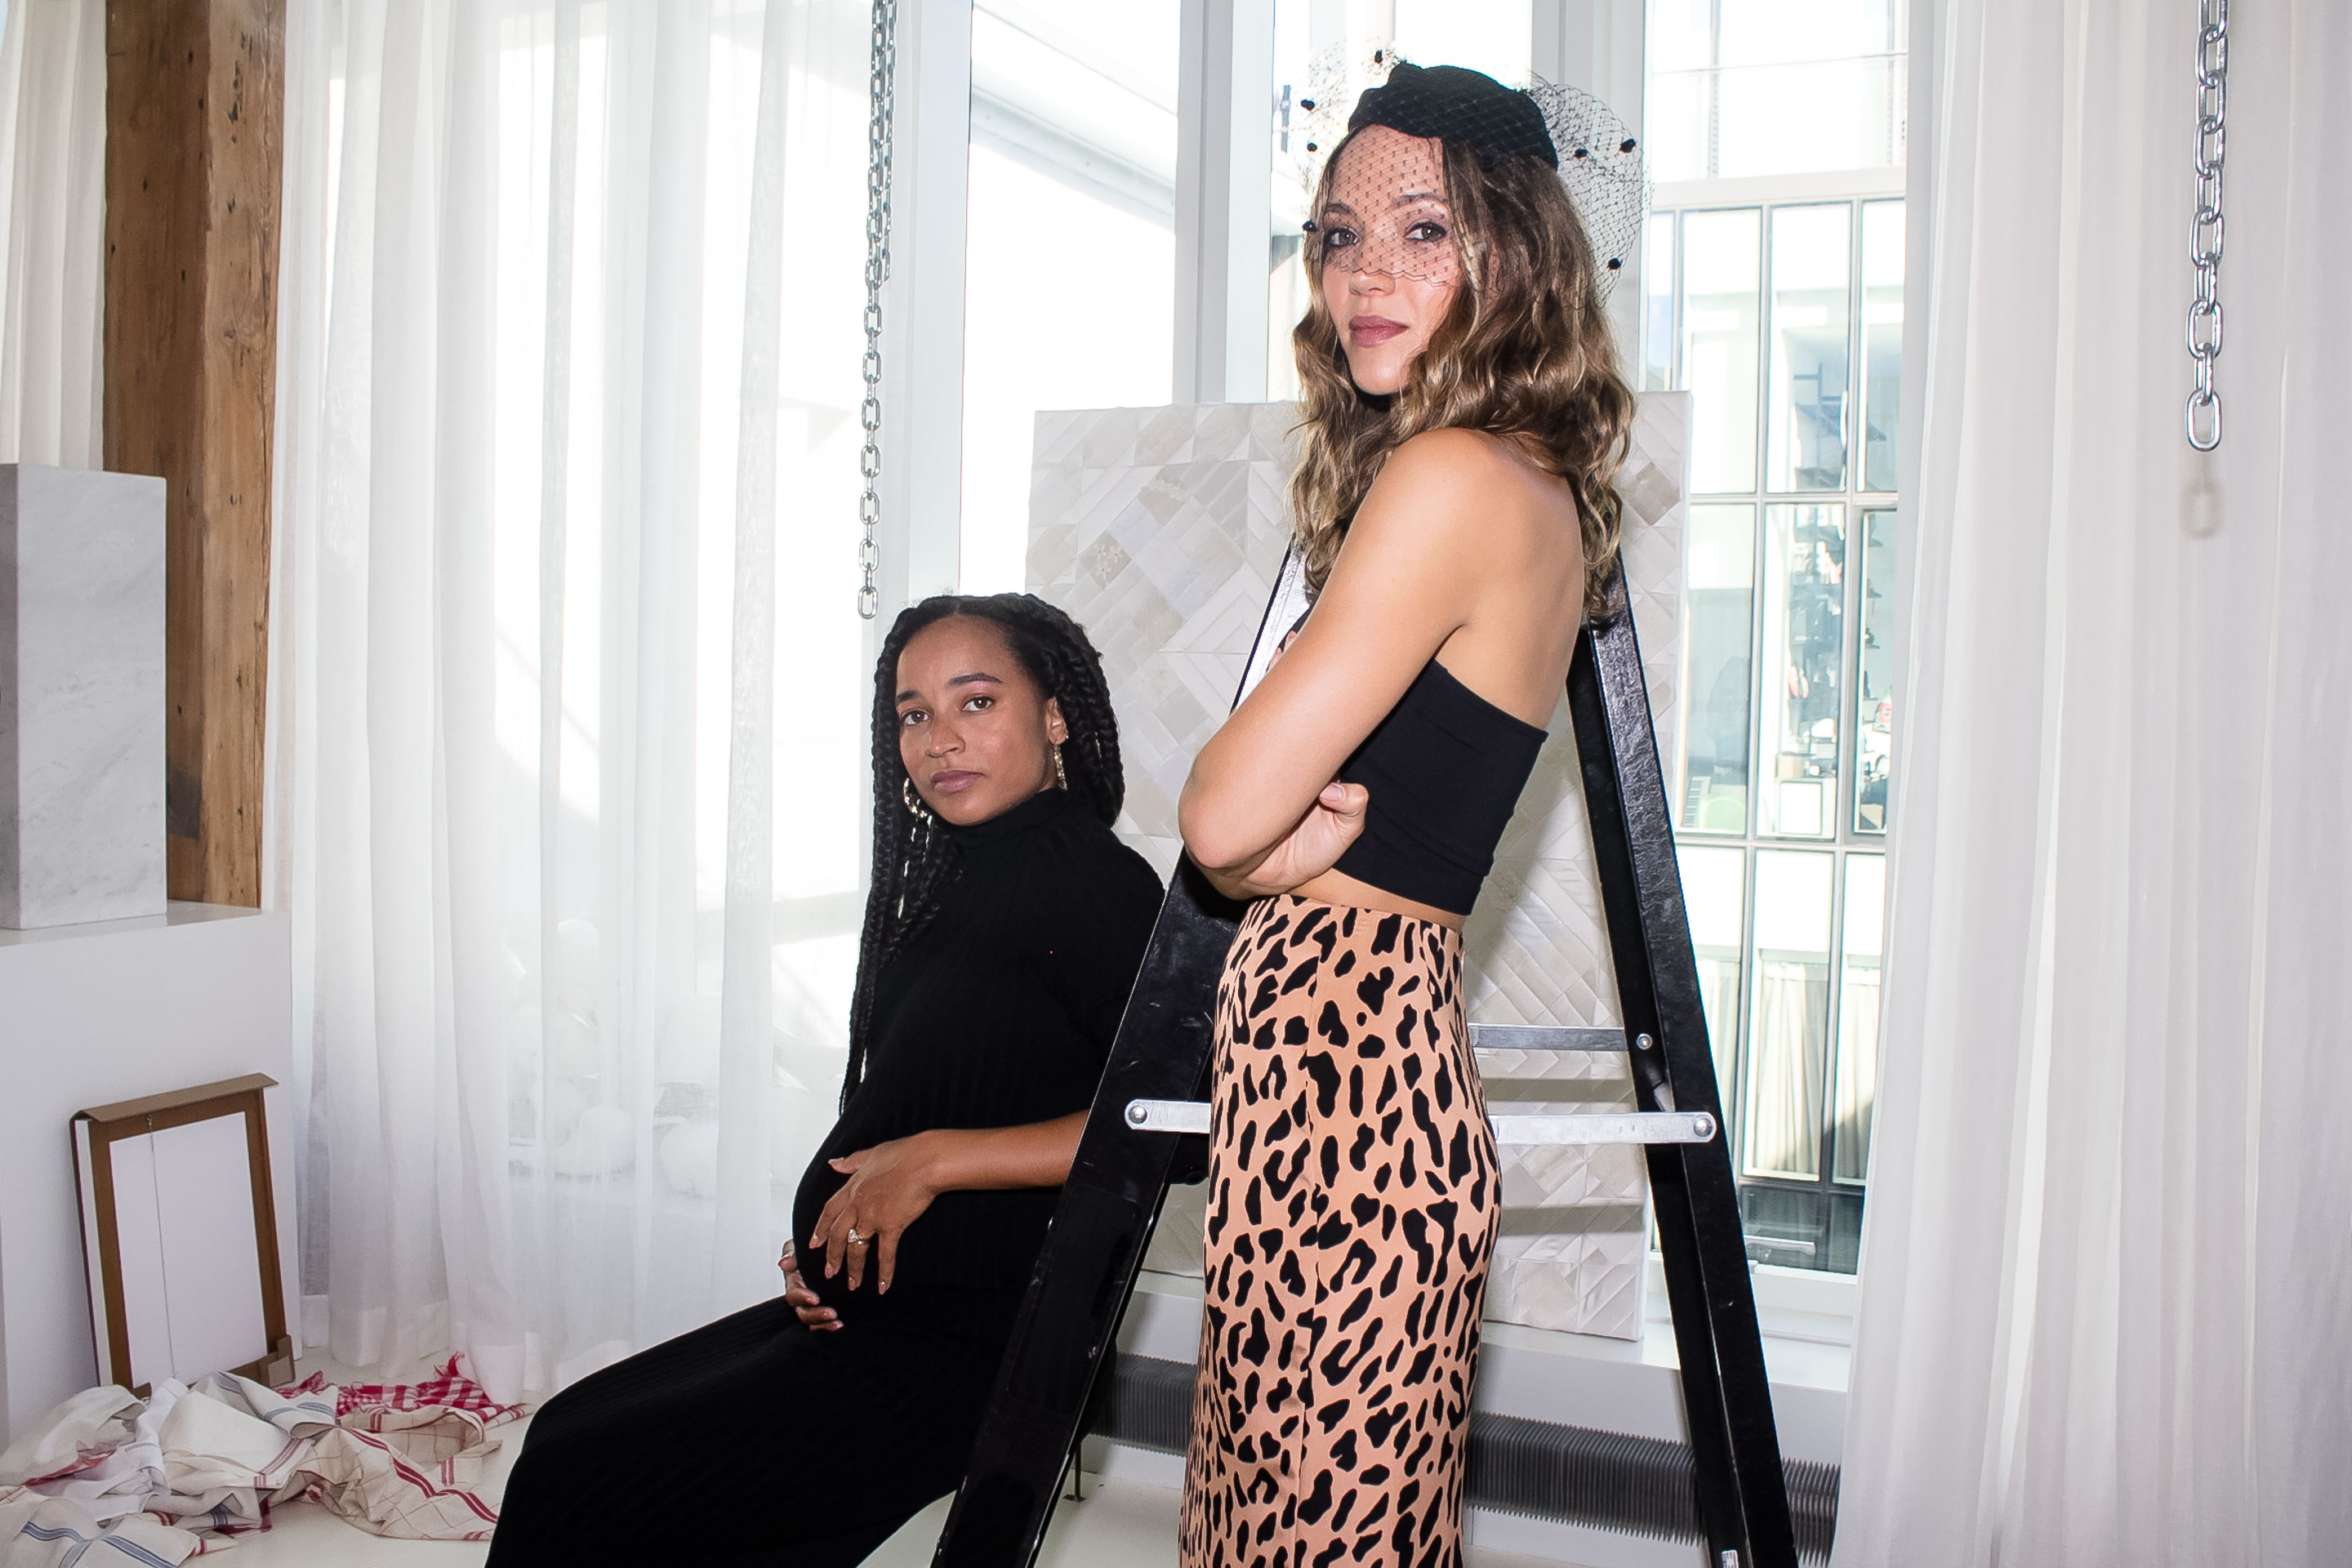 Curator Rujeko Hockley and artist Zoe Buckman are friends in and beyond the art world.